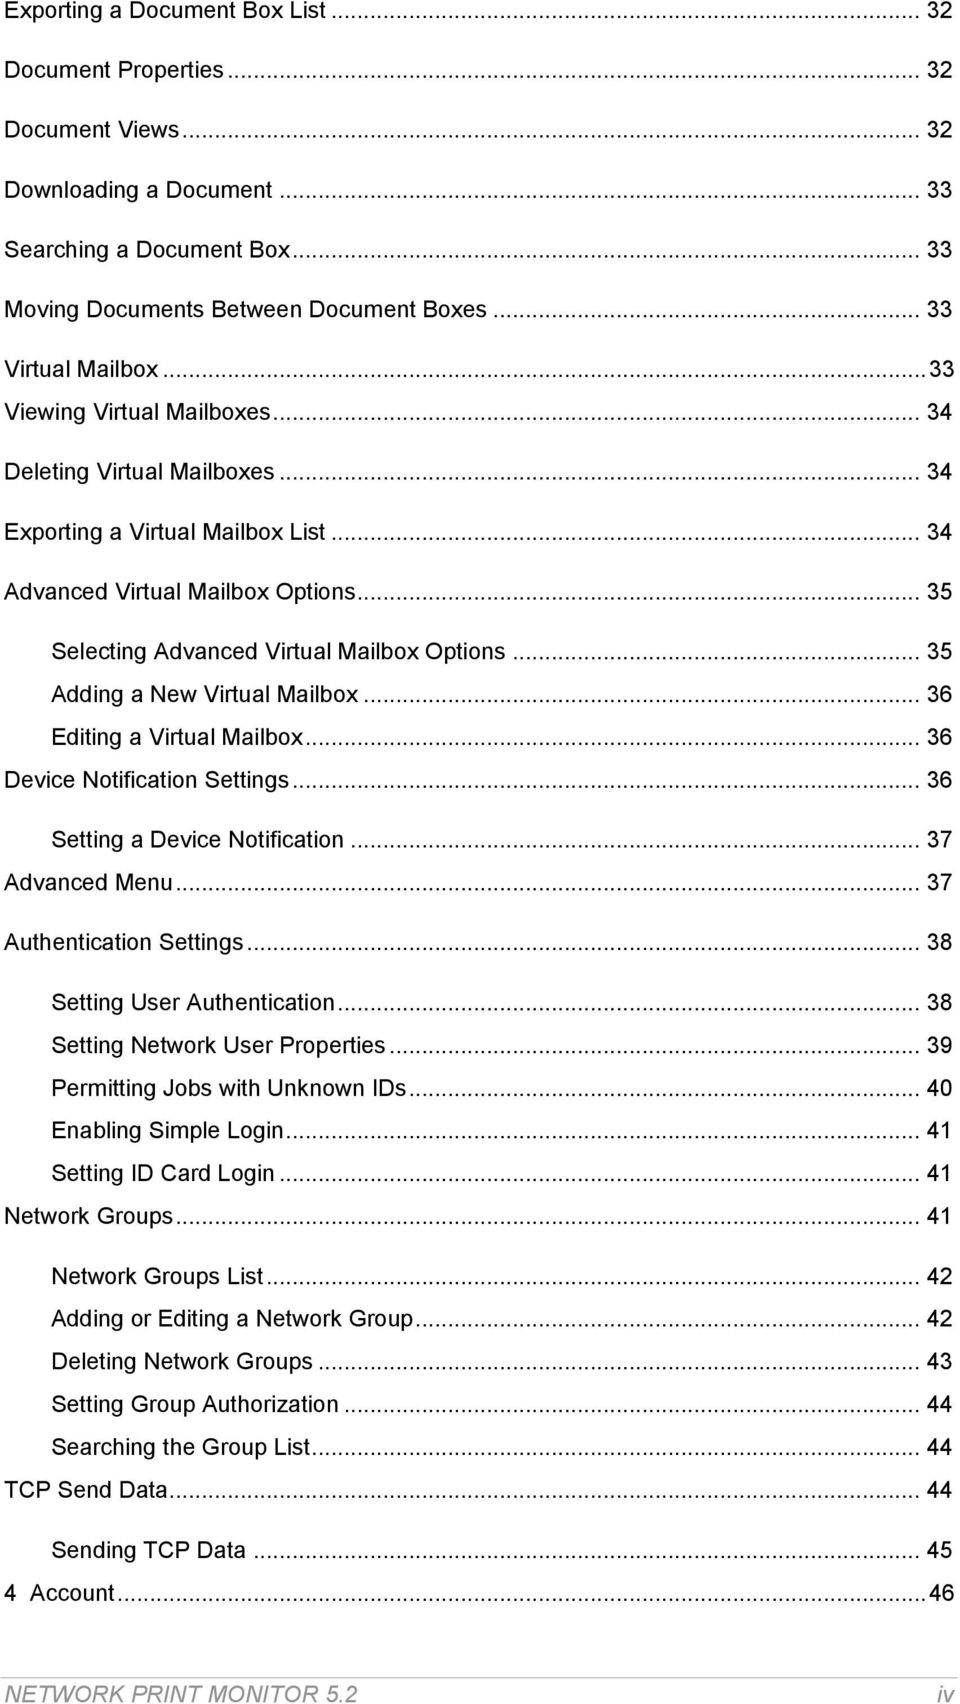 .. 35 Selecting Advanced Virtual Mailbox Options... 35 Adding a New Virtual Mailbox... 36 Editing a Virtual Mailbox... 36 Device Notification Settings... 36 Setting a Device Notification.